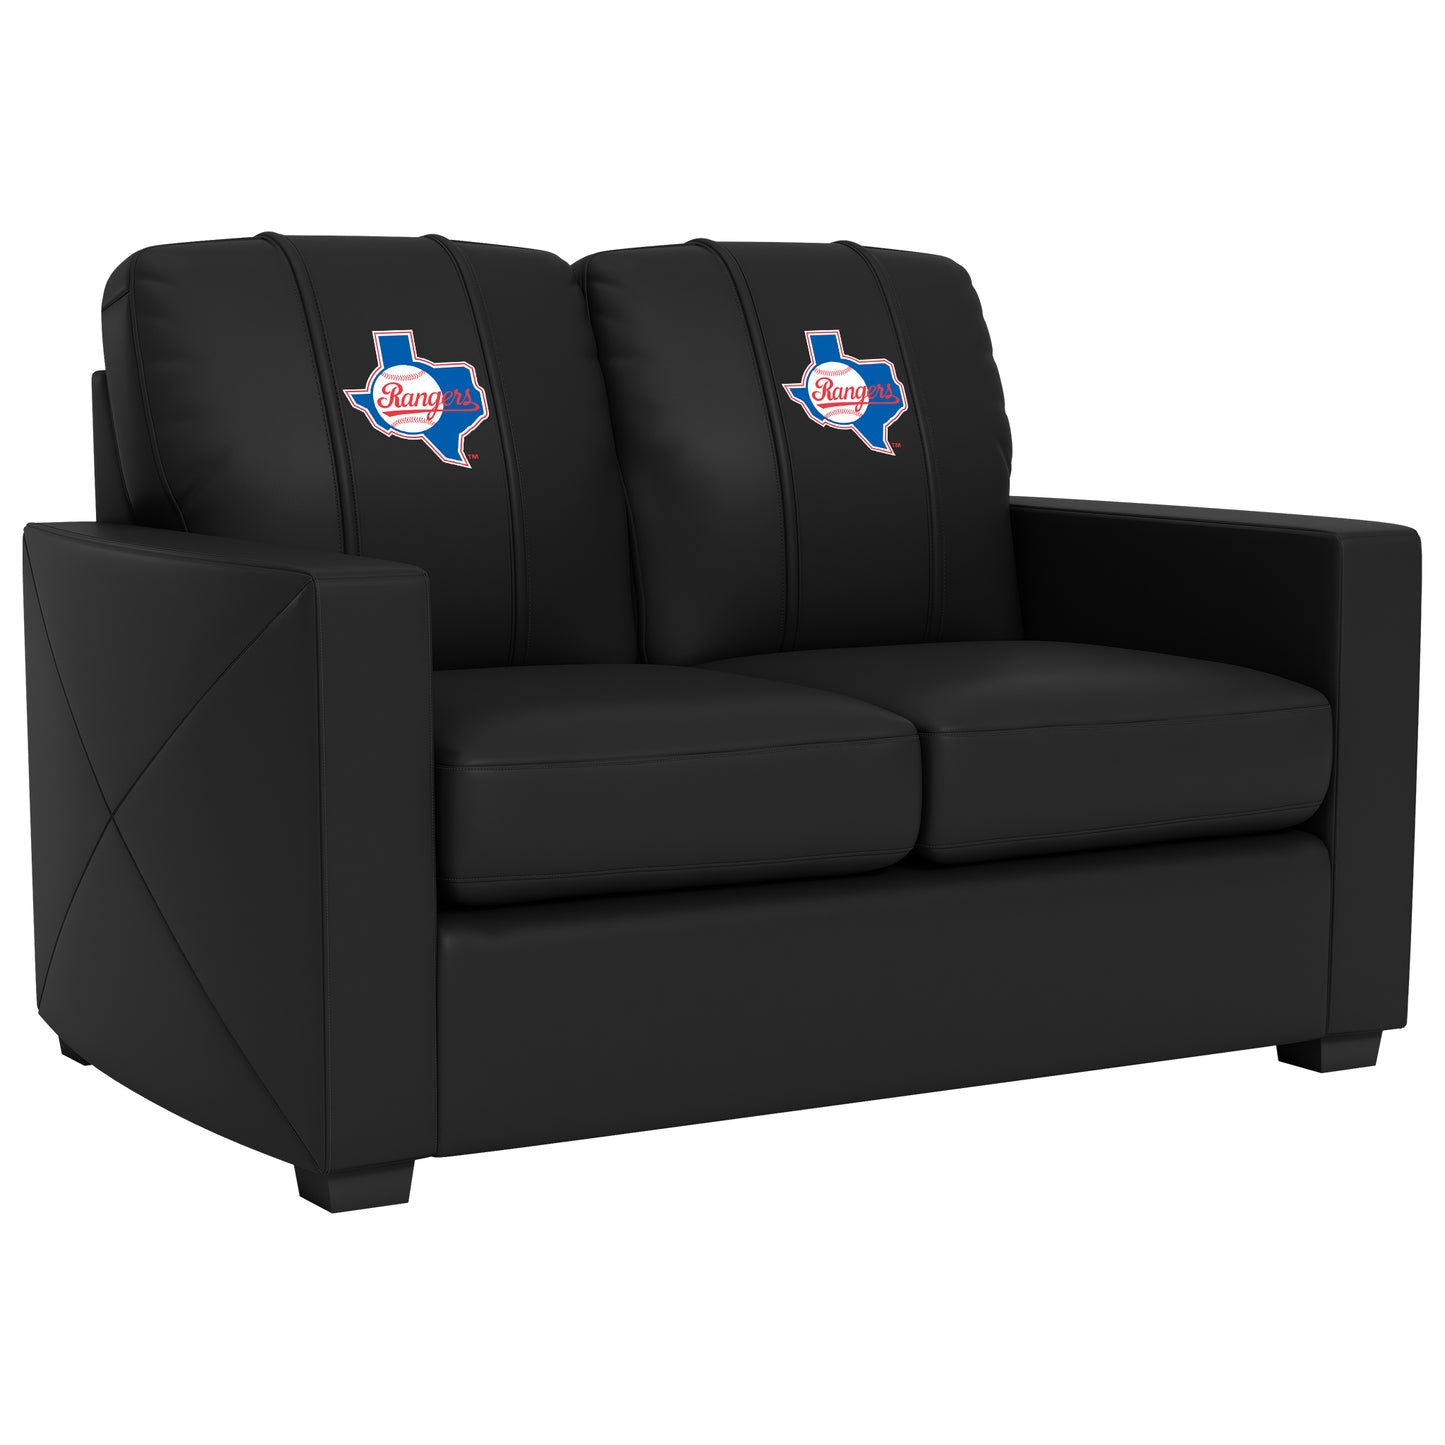 Silver Loveseat with Texas Rangers Cooperstown